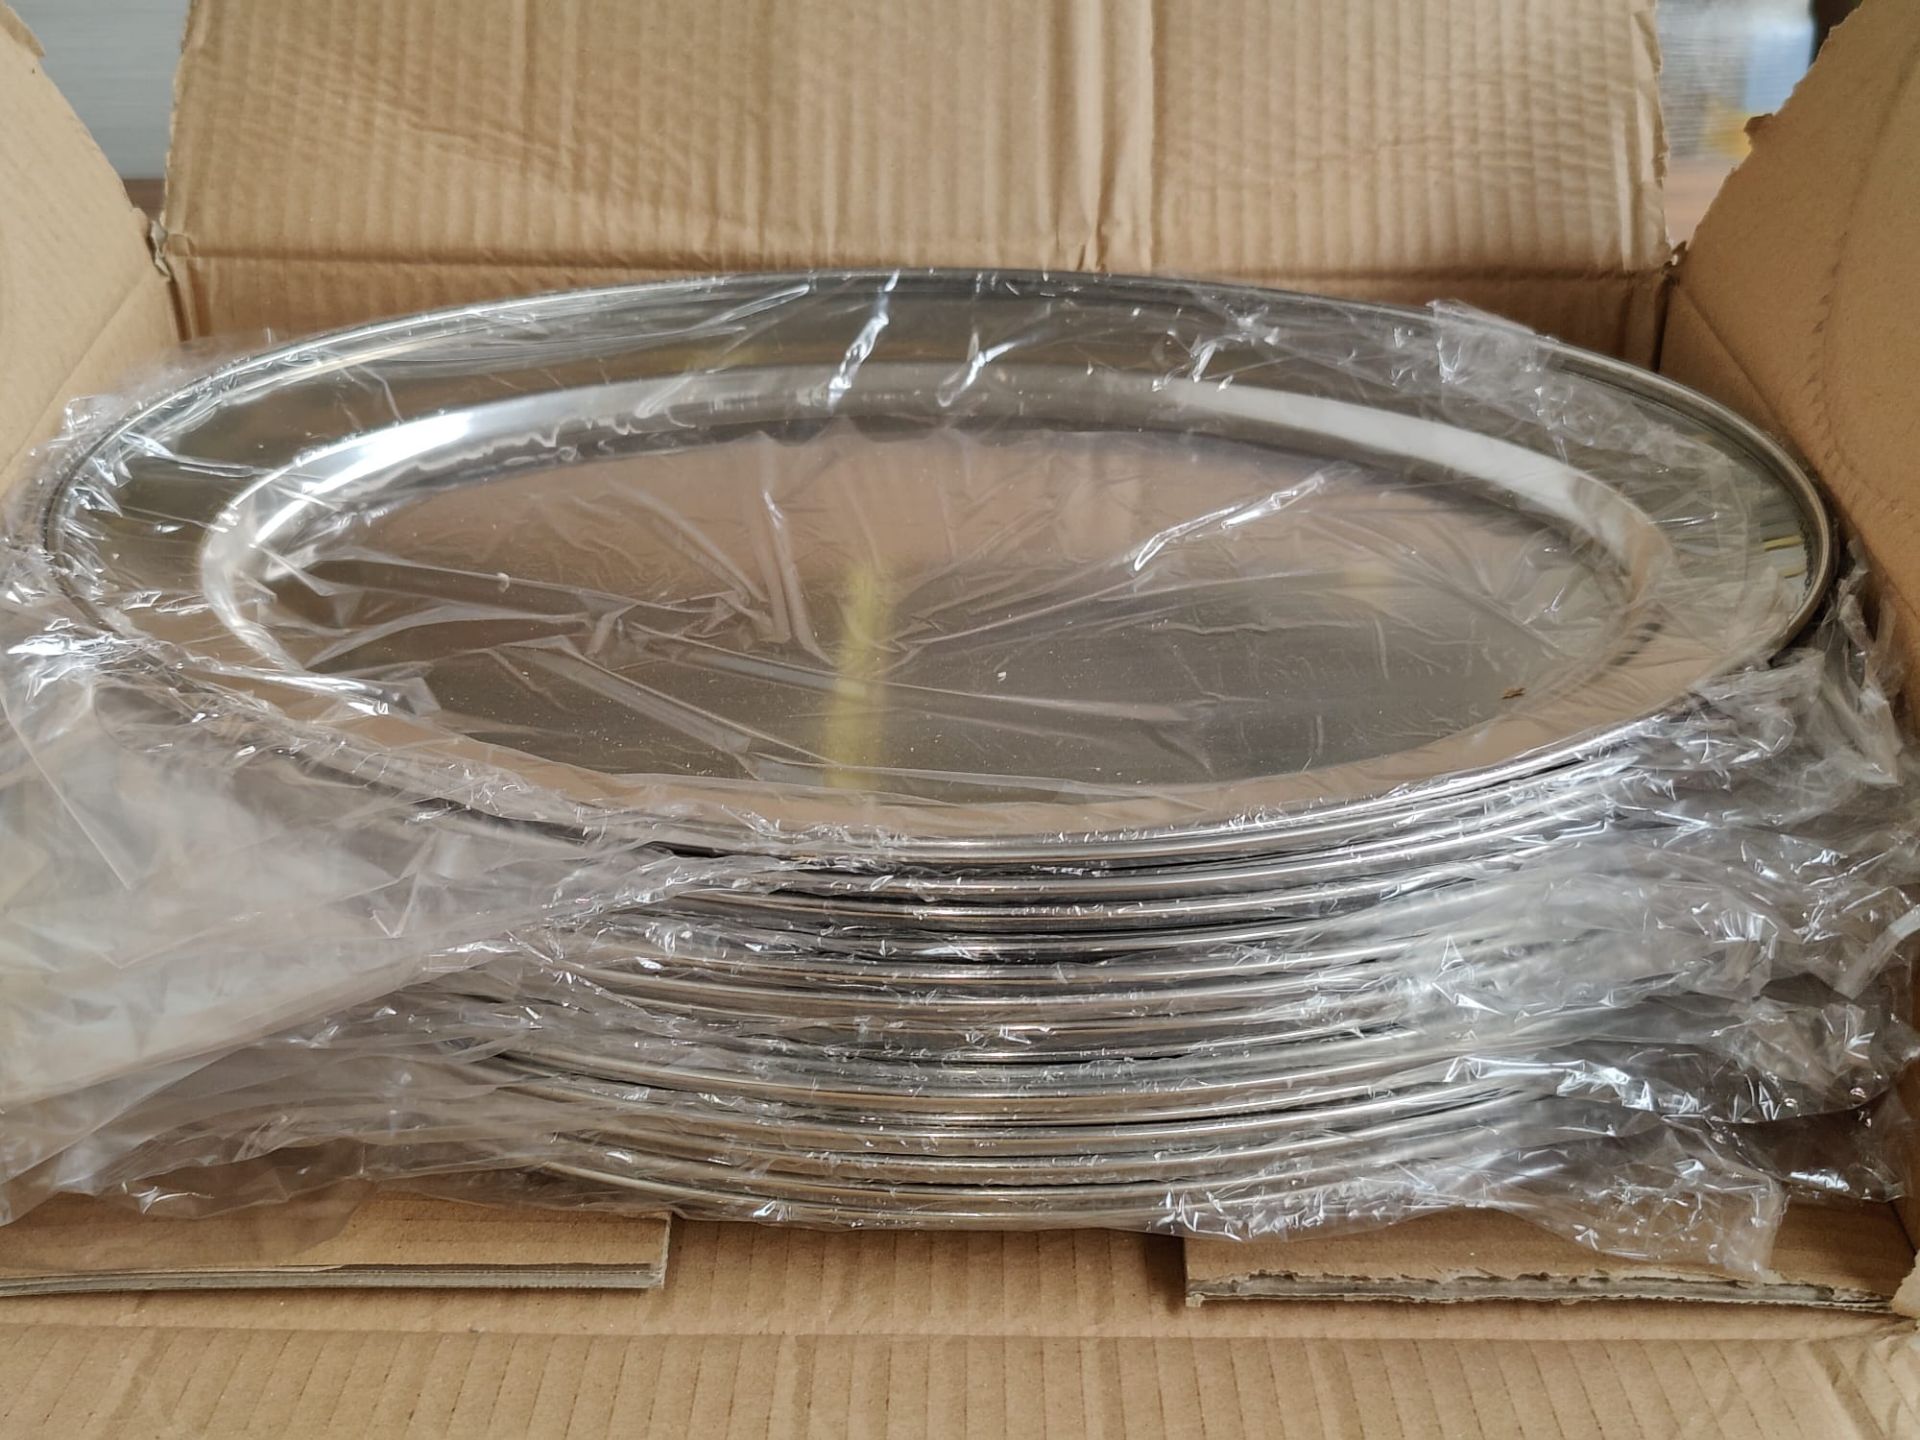 20 x Stainless Steel Oval Service Trays - Size: 450mm x 310mm - Brand New Boxed Stock - RRP £200 - Image 7 of 8